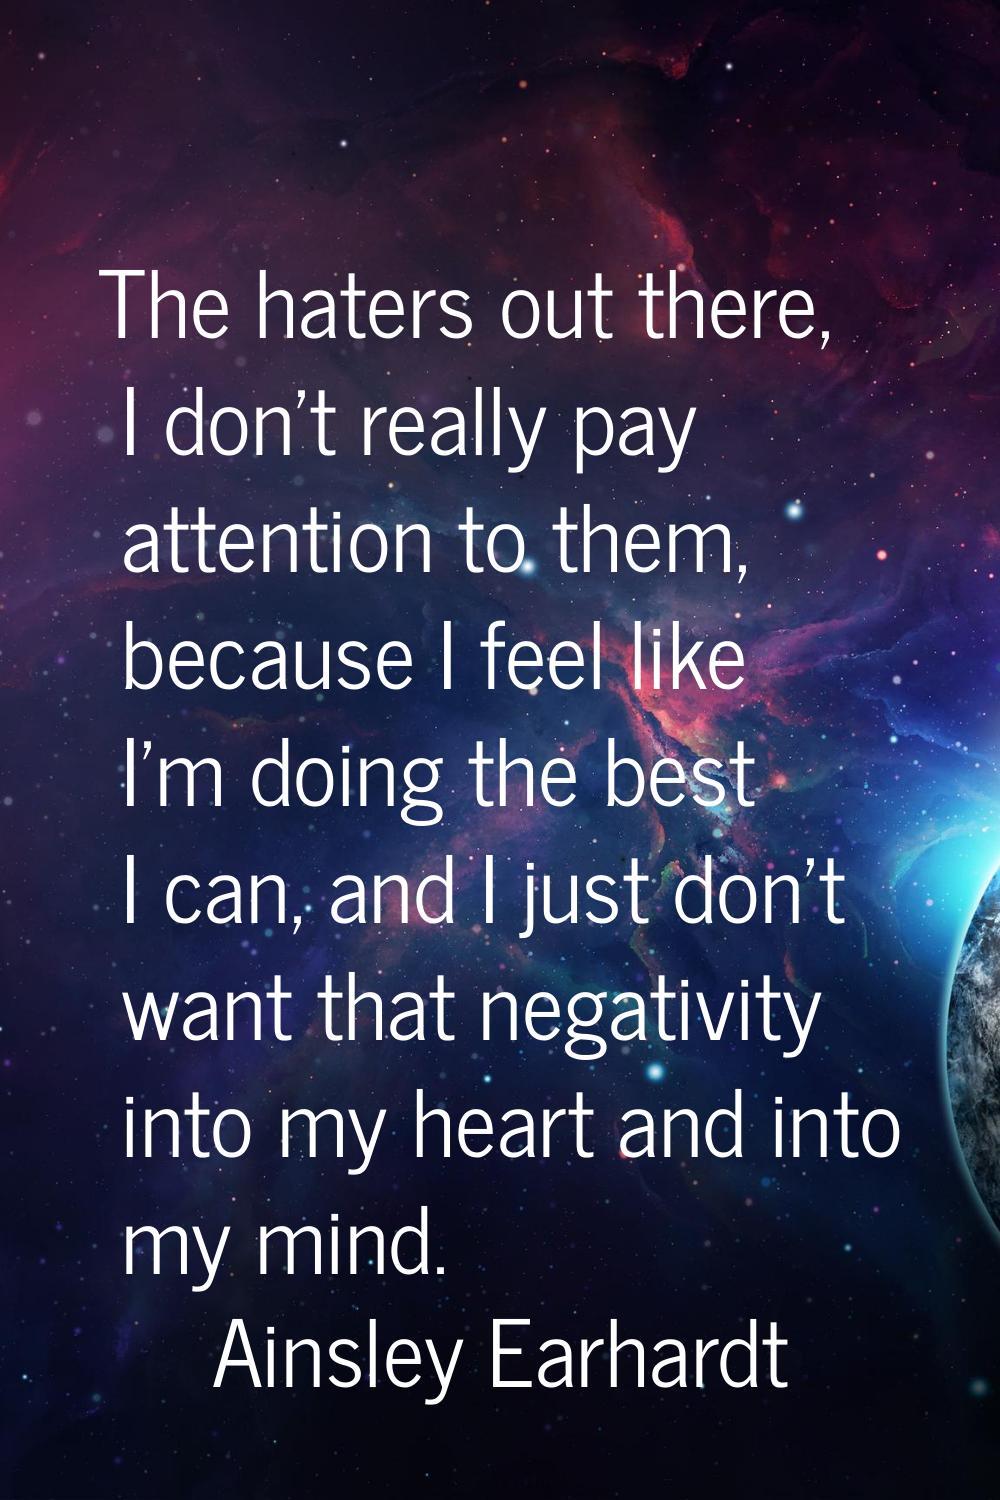 The haters out there, I don't really pay attention to them, because I feel like I'm doing the best 